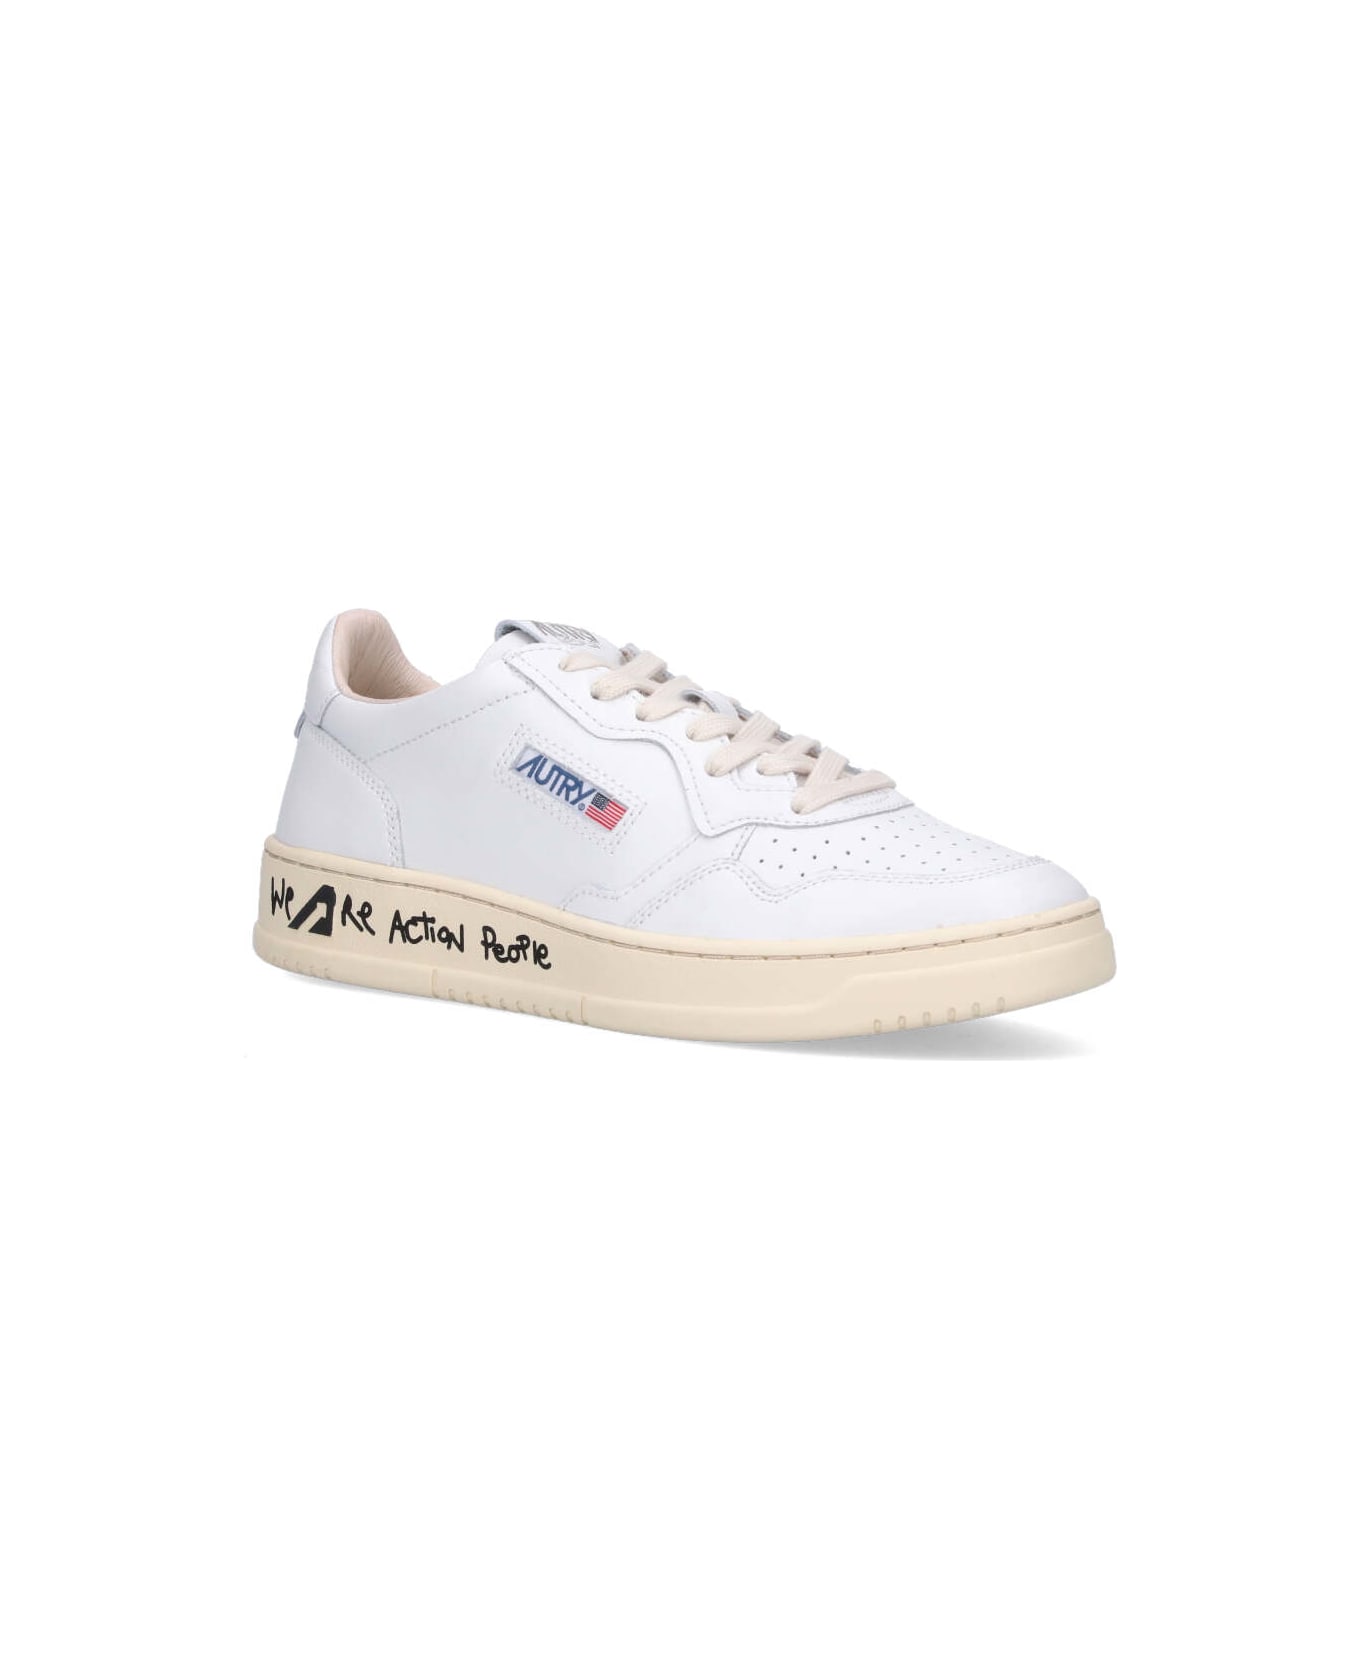 Autry Medalist Sneakers Aulm Ld06 - White